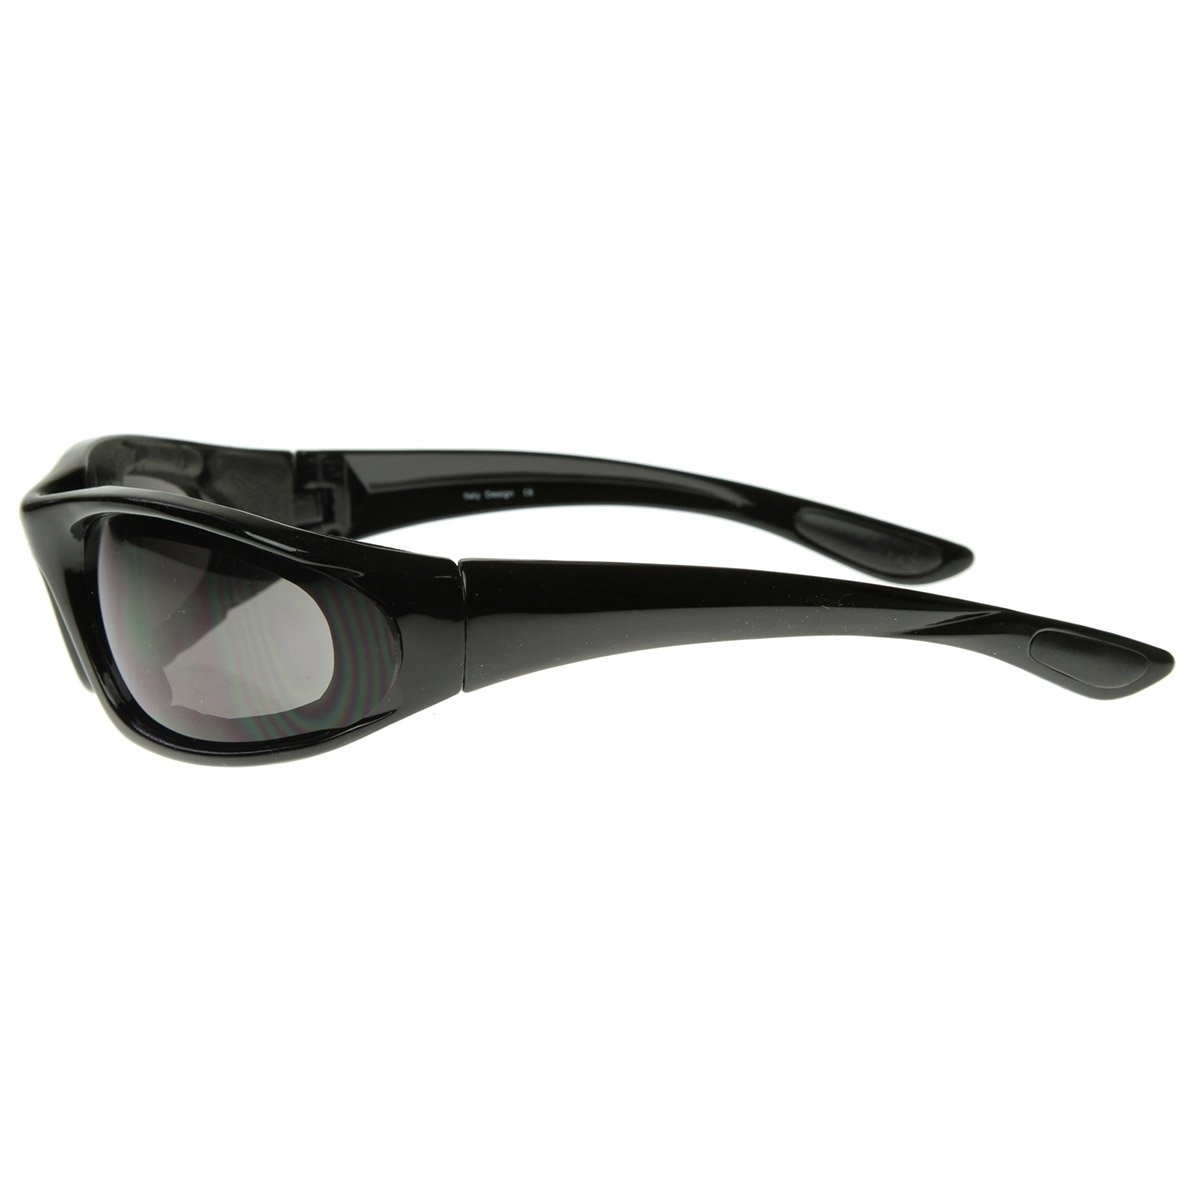 Mid Sized Unisex Protective Active Eyewear Goggles Ideal For Driving/Sports/Bike - Black Clear